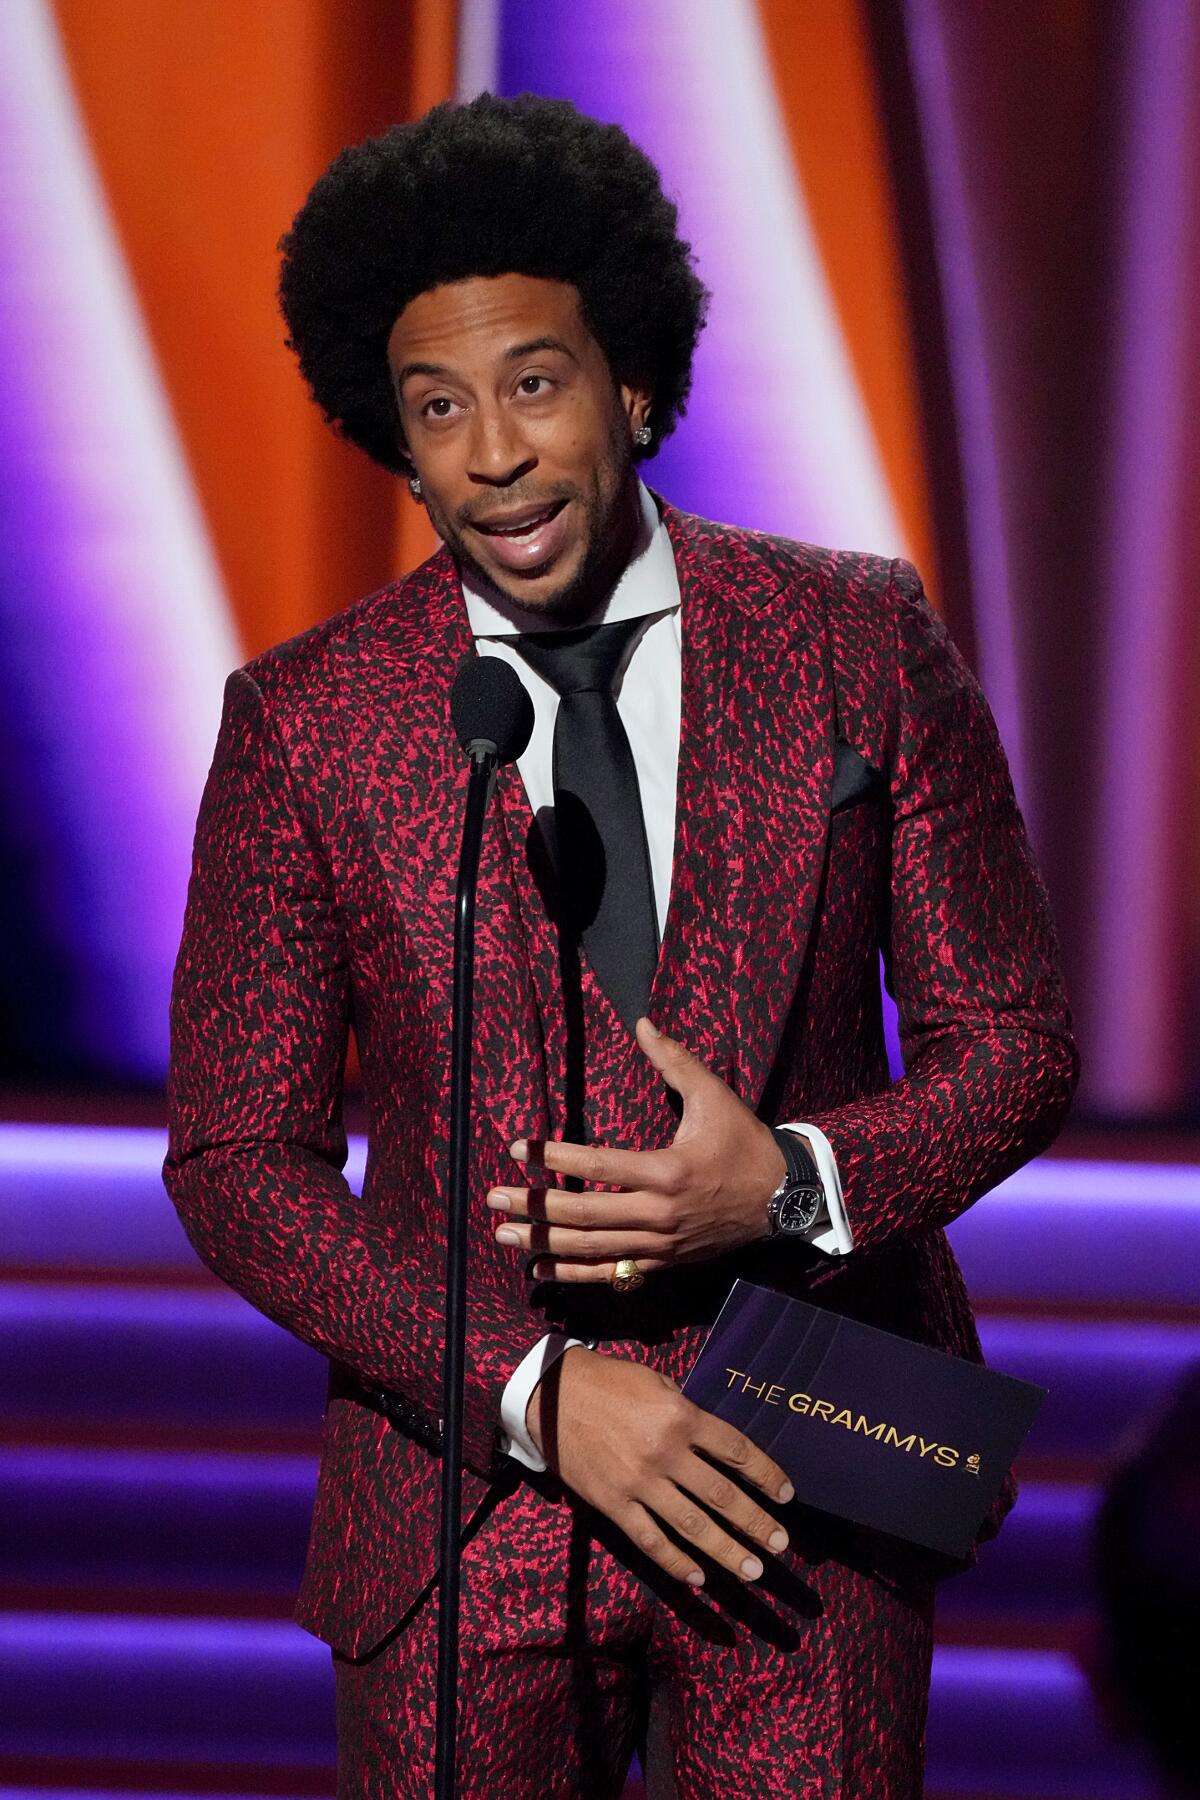 Ludacris speaks onstage during the 64th Grammy Awards.